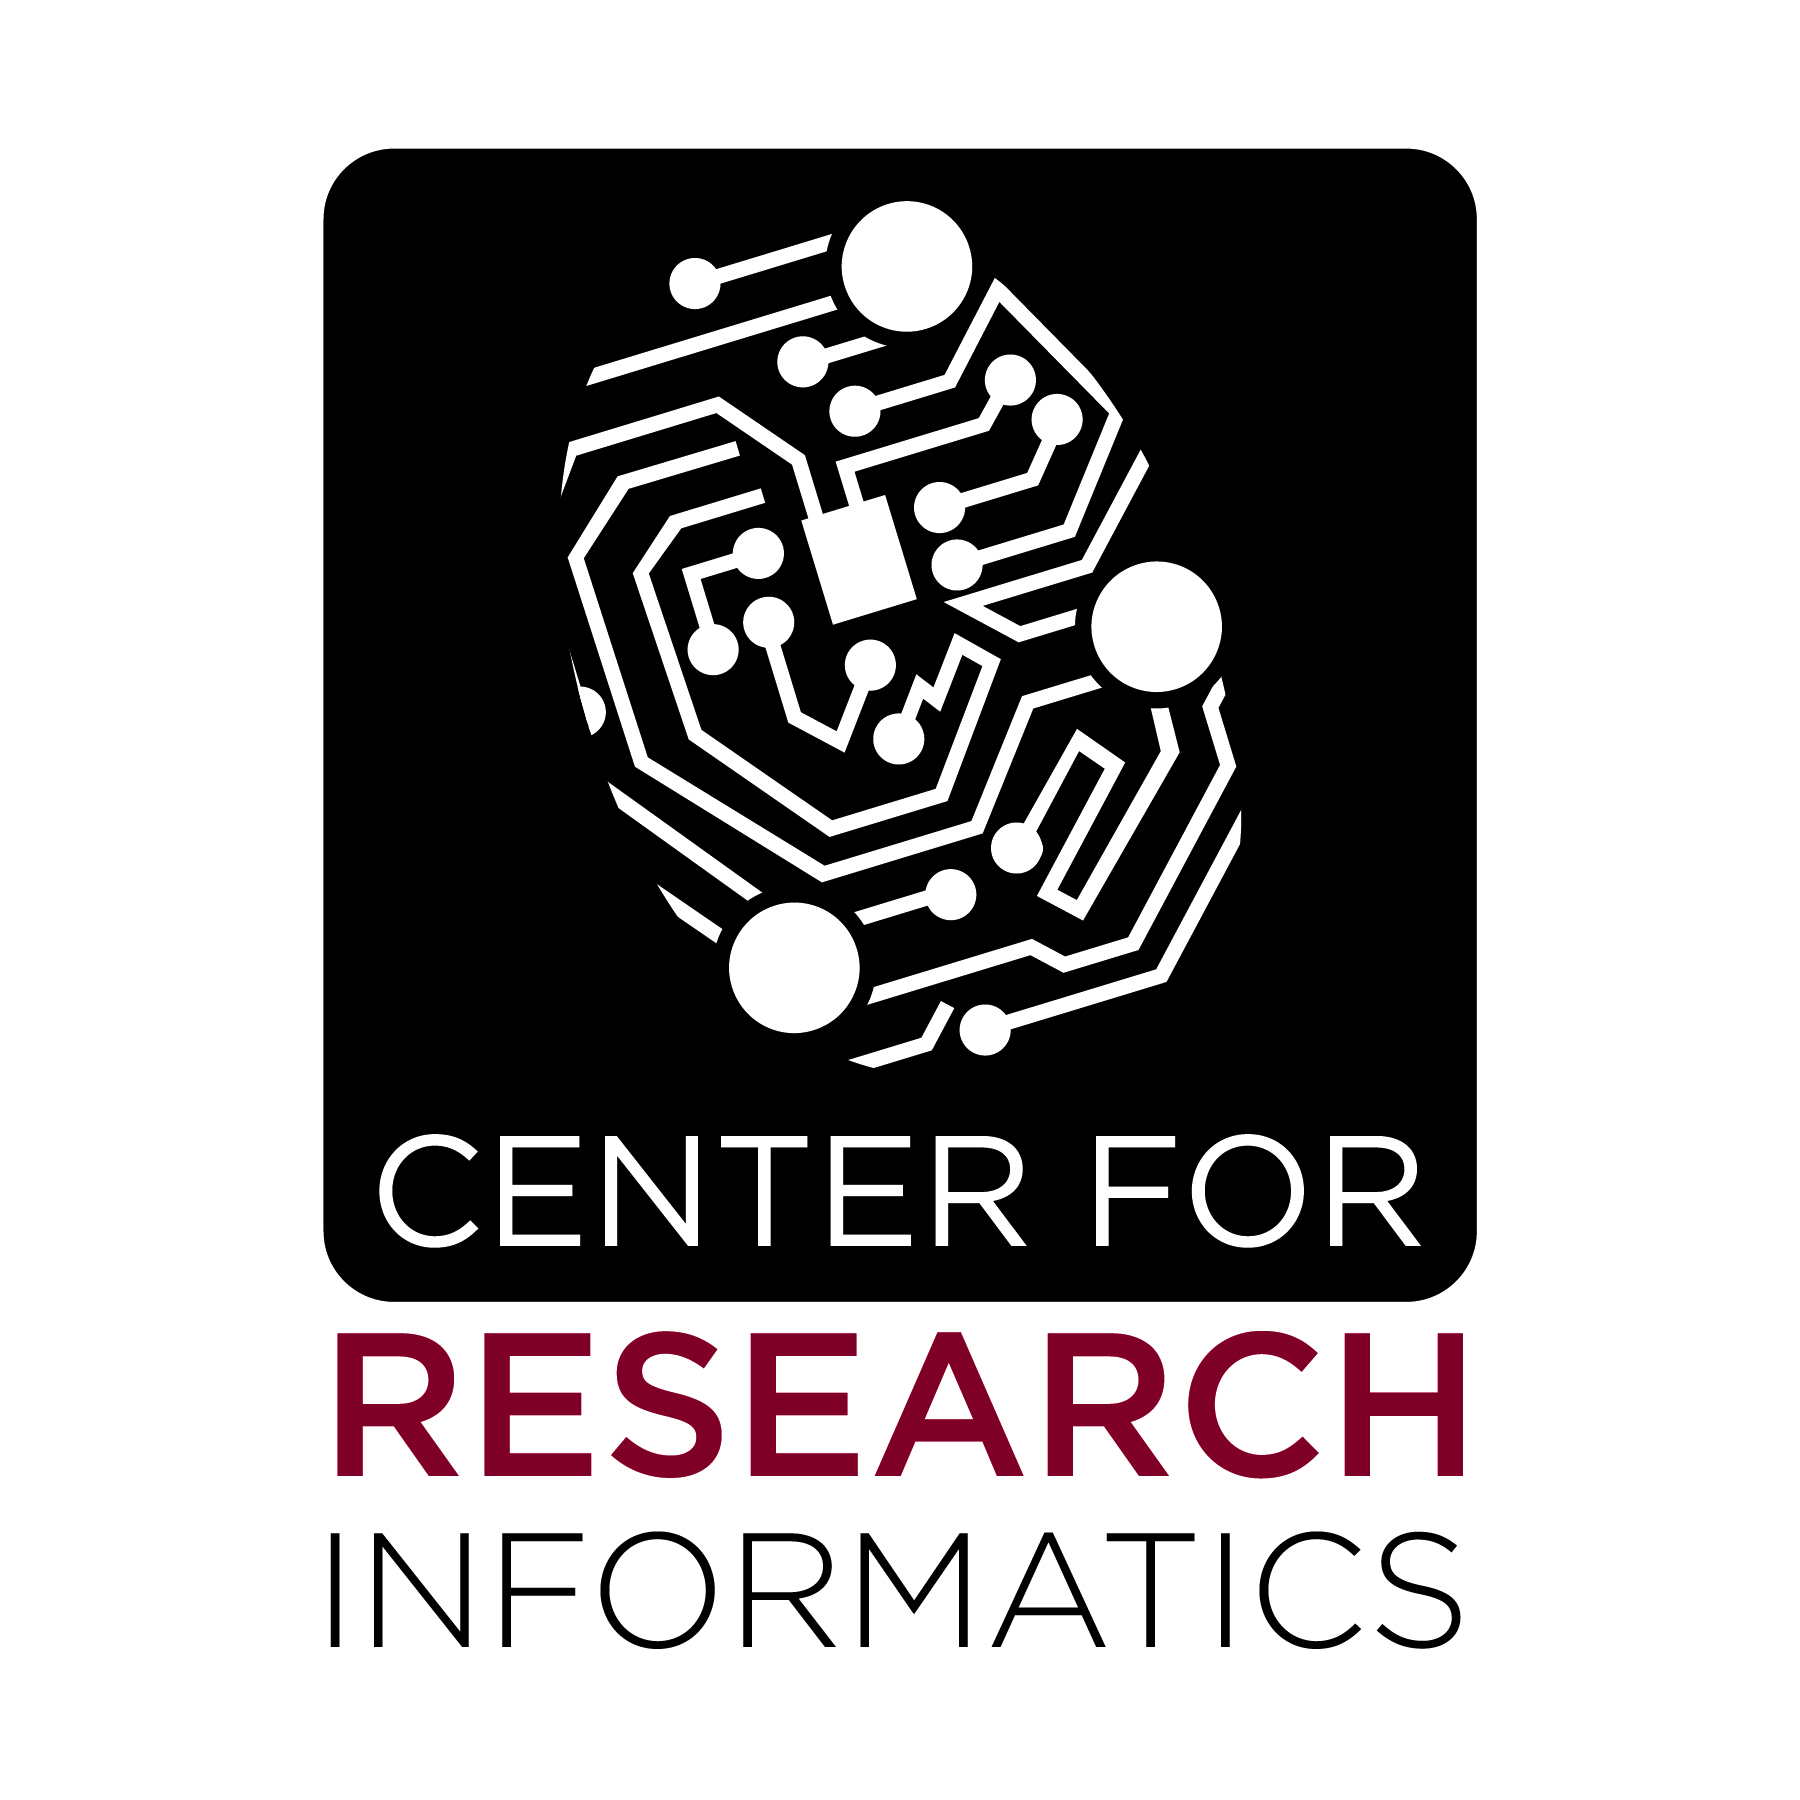 University of Chicago, Center for Research Informatics